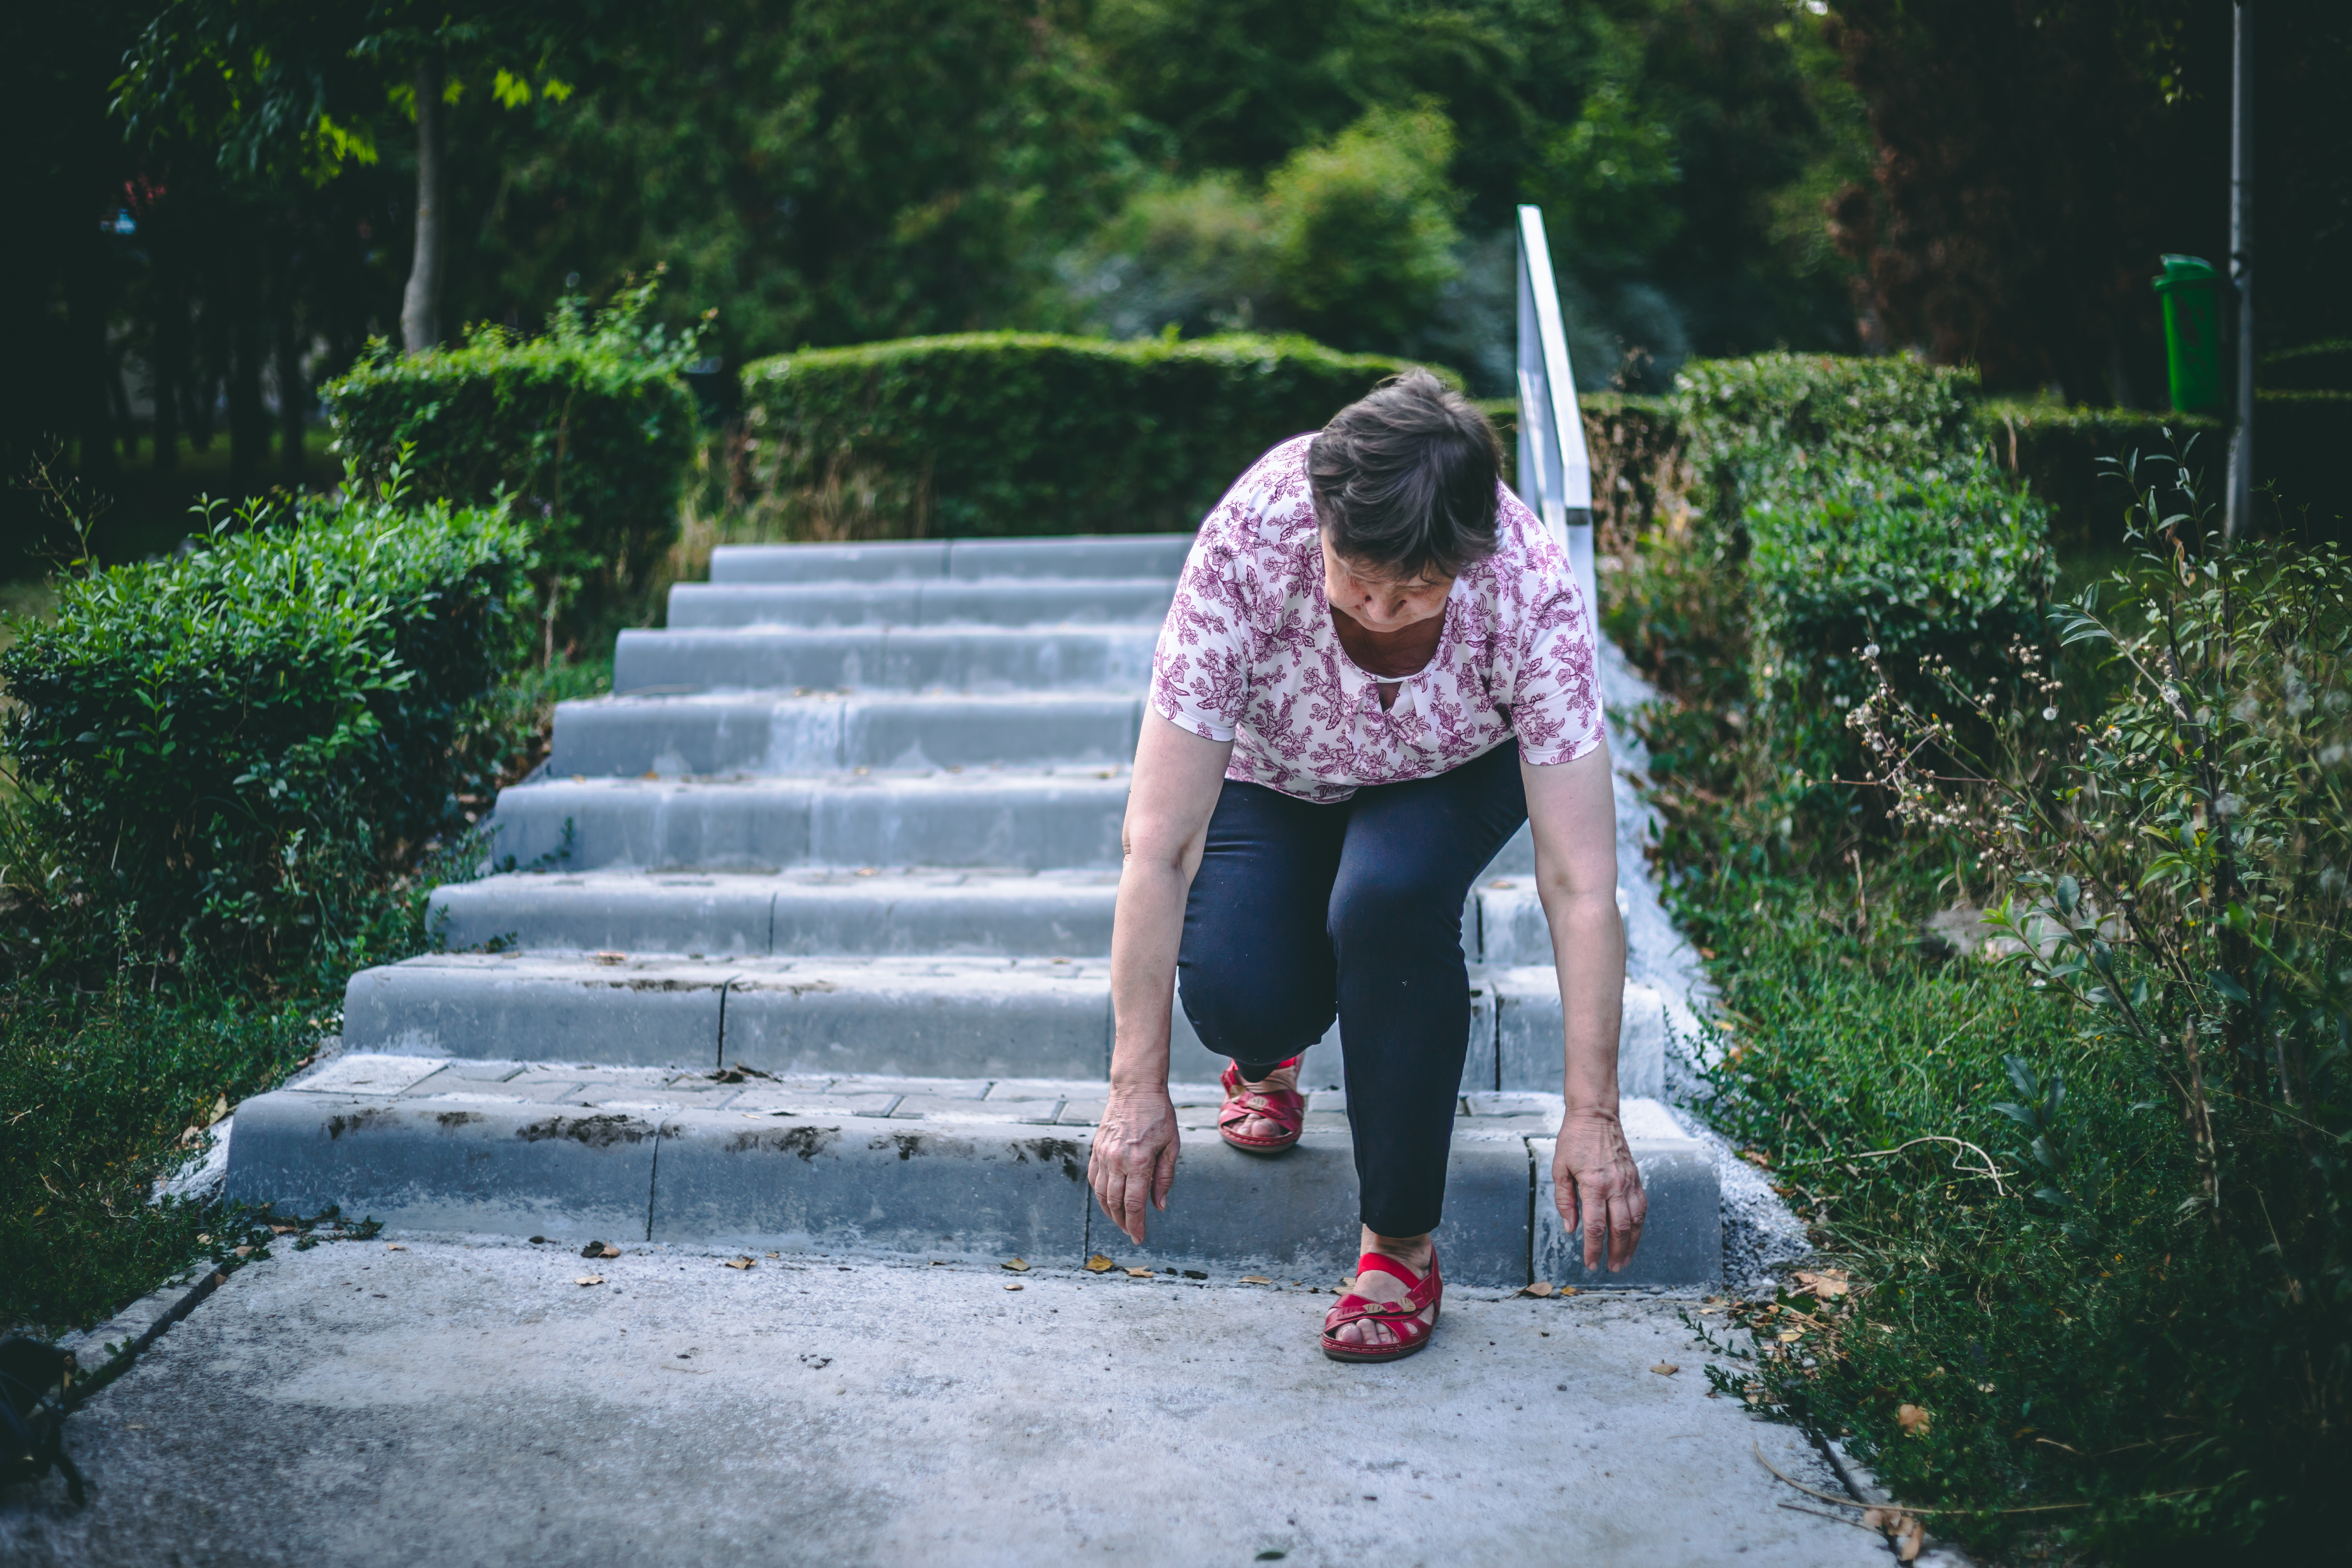 Weak senior woman slipping on stairs in the park. | Source: Shutterstock